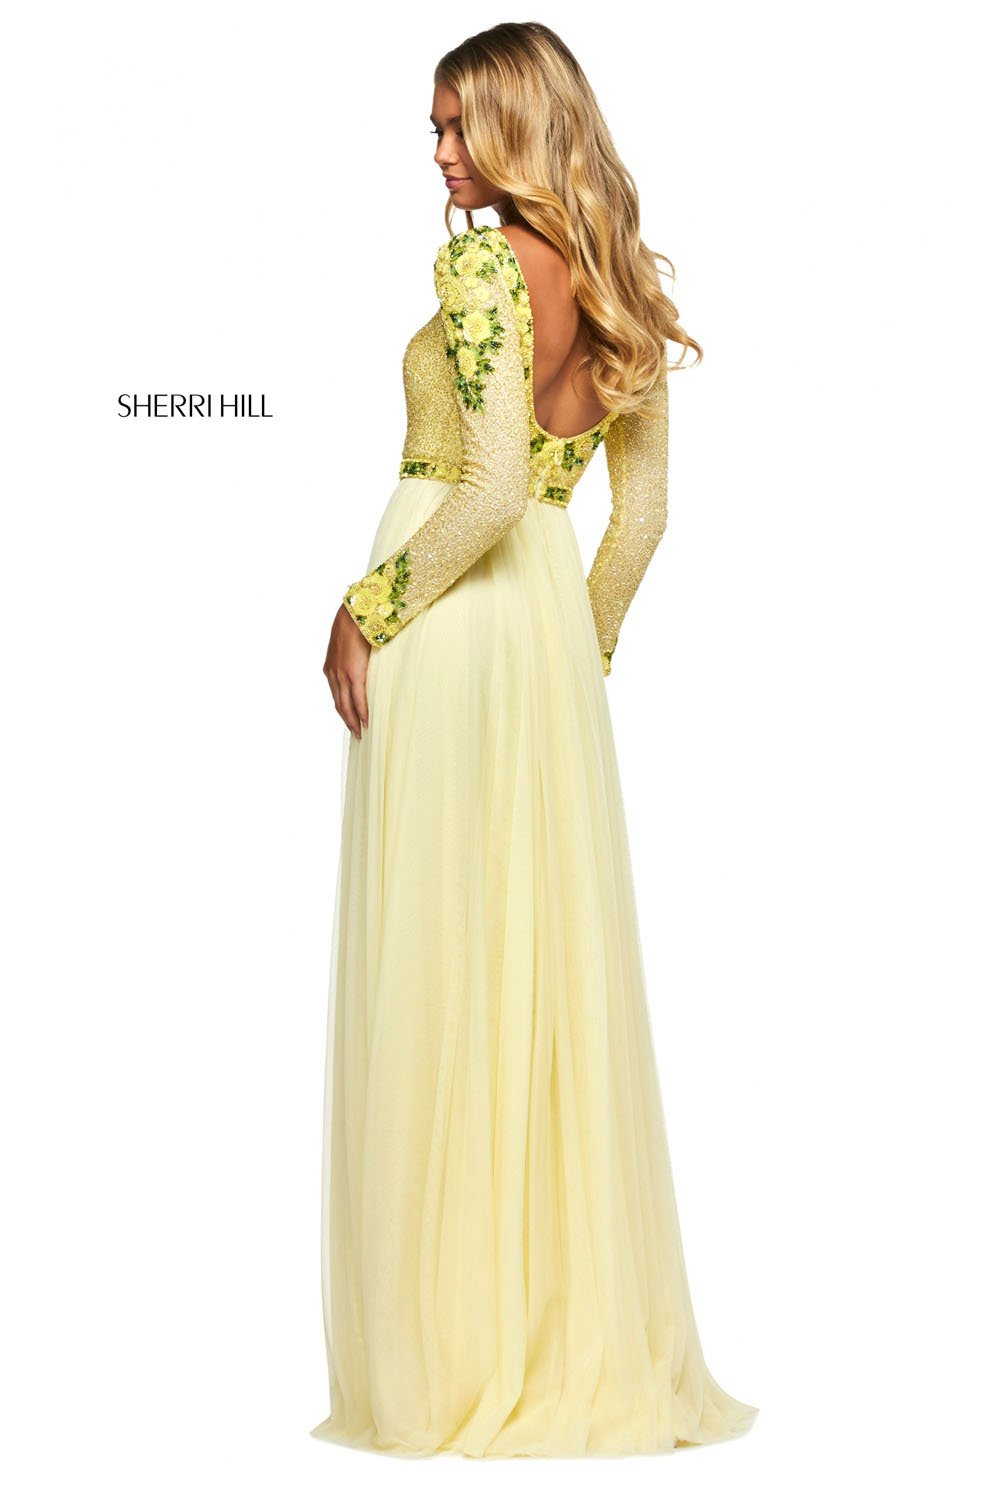 Sherri Hill 53485 dress images in these colors: Yellow Green.